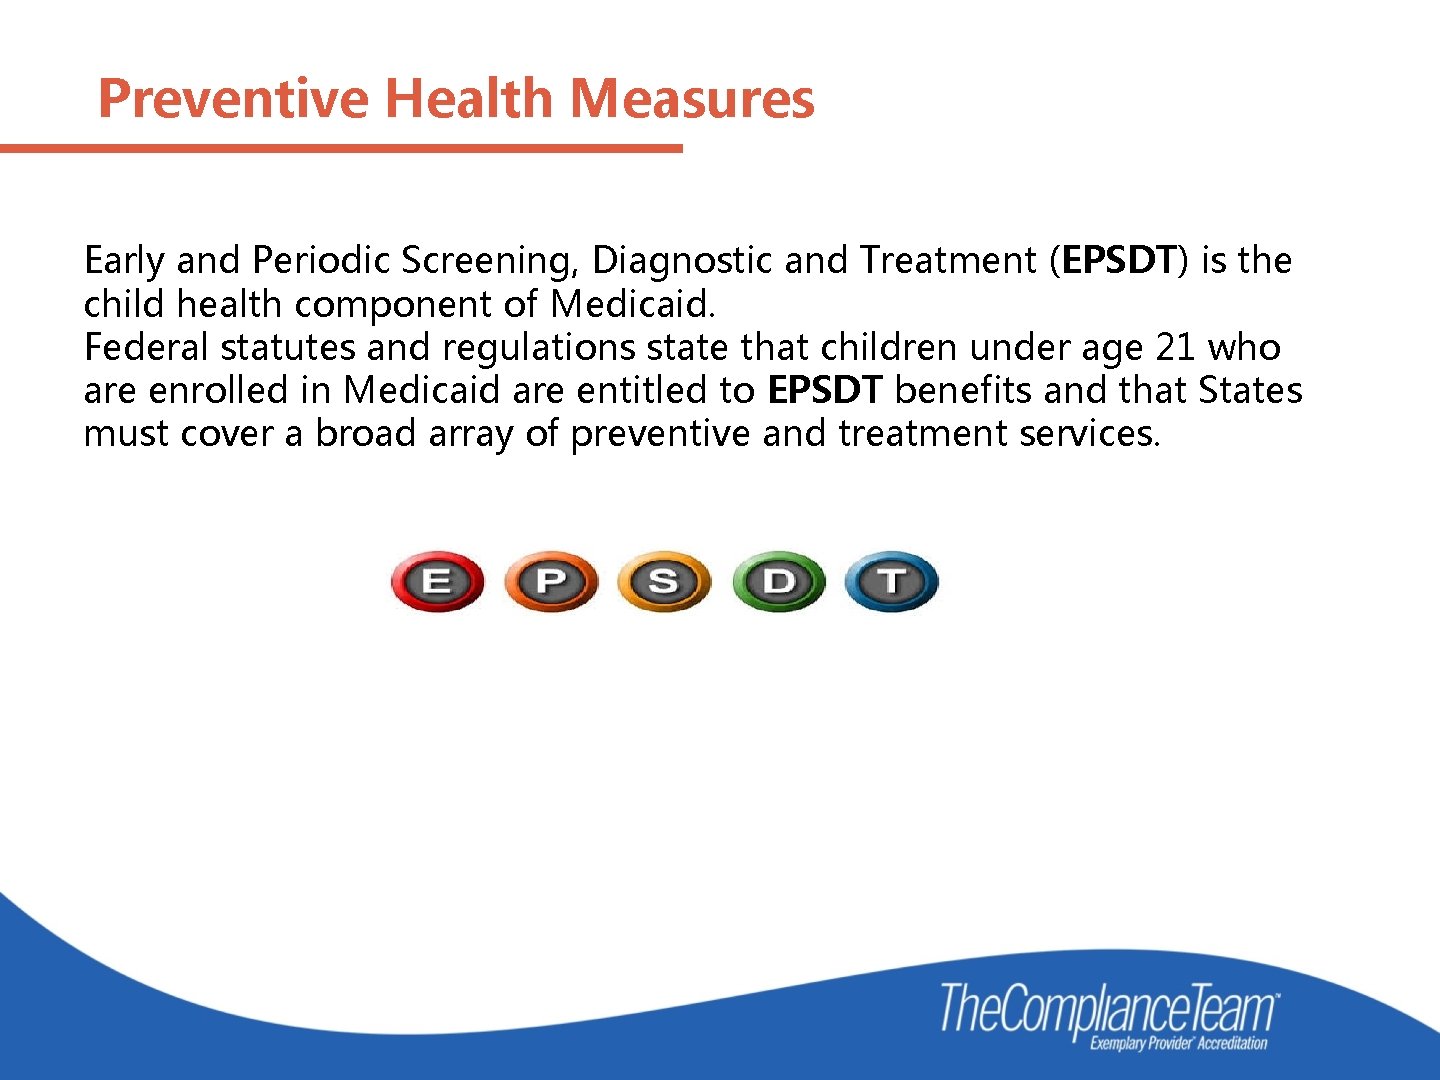 Preventive Health Measures Early and Periodic Screening, Diagnostic and Treatment (EPSDT) is the child